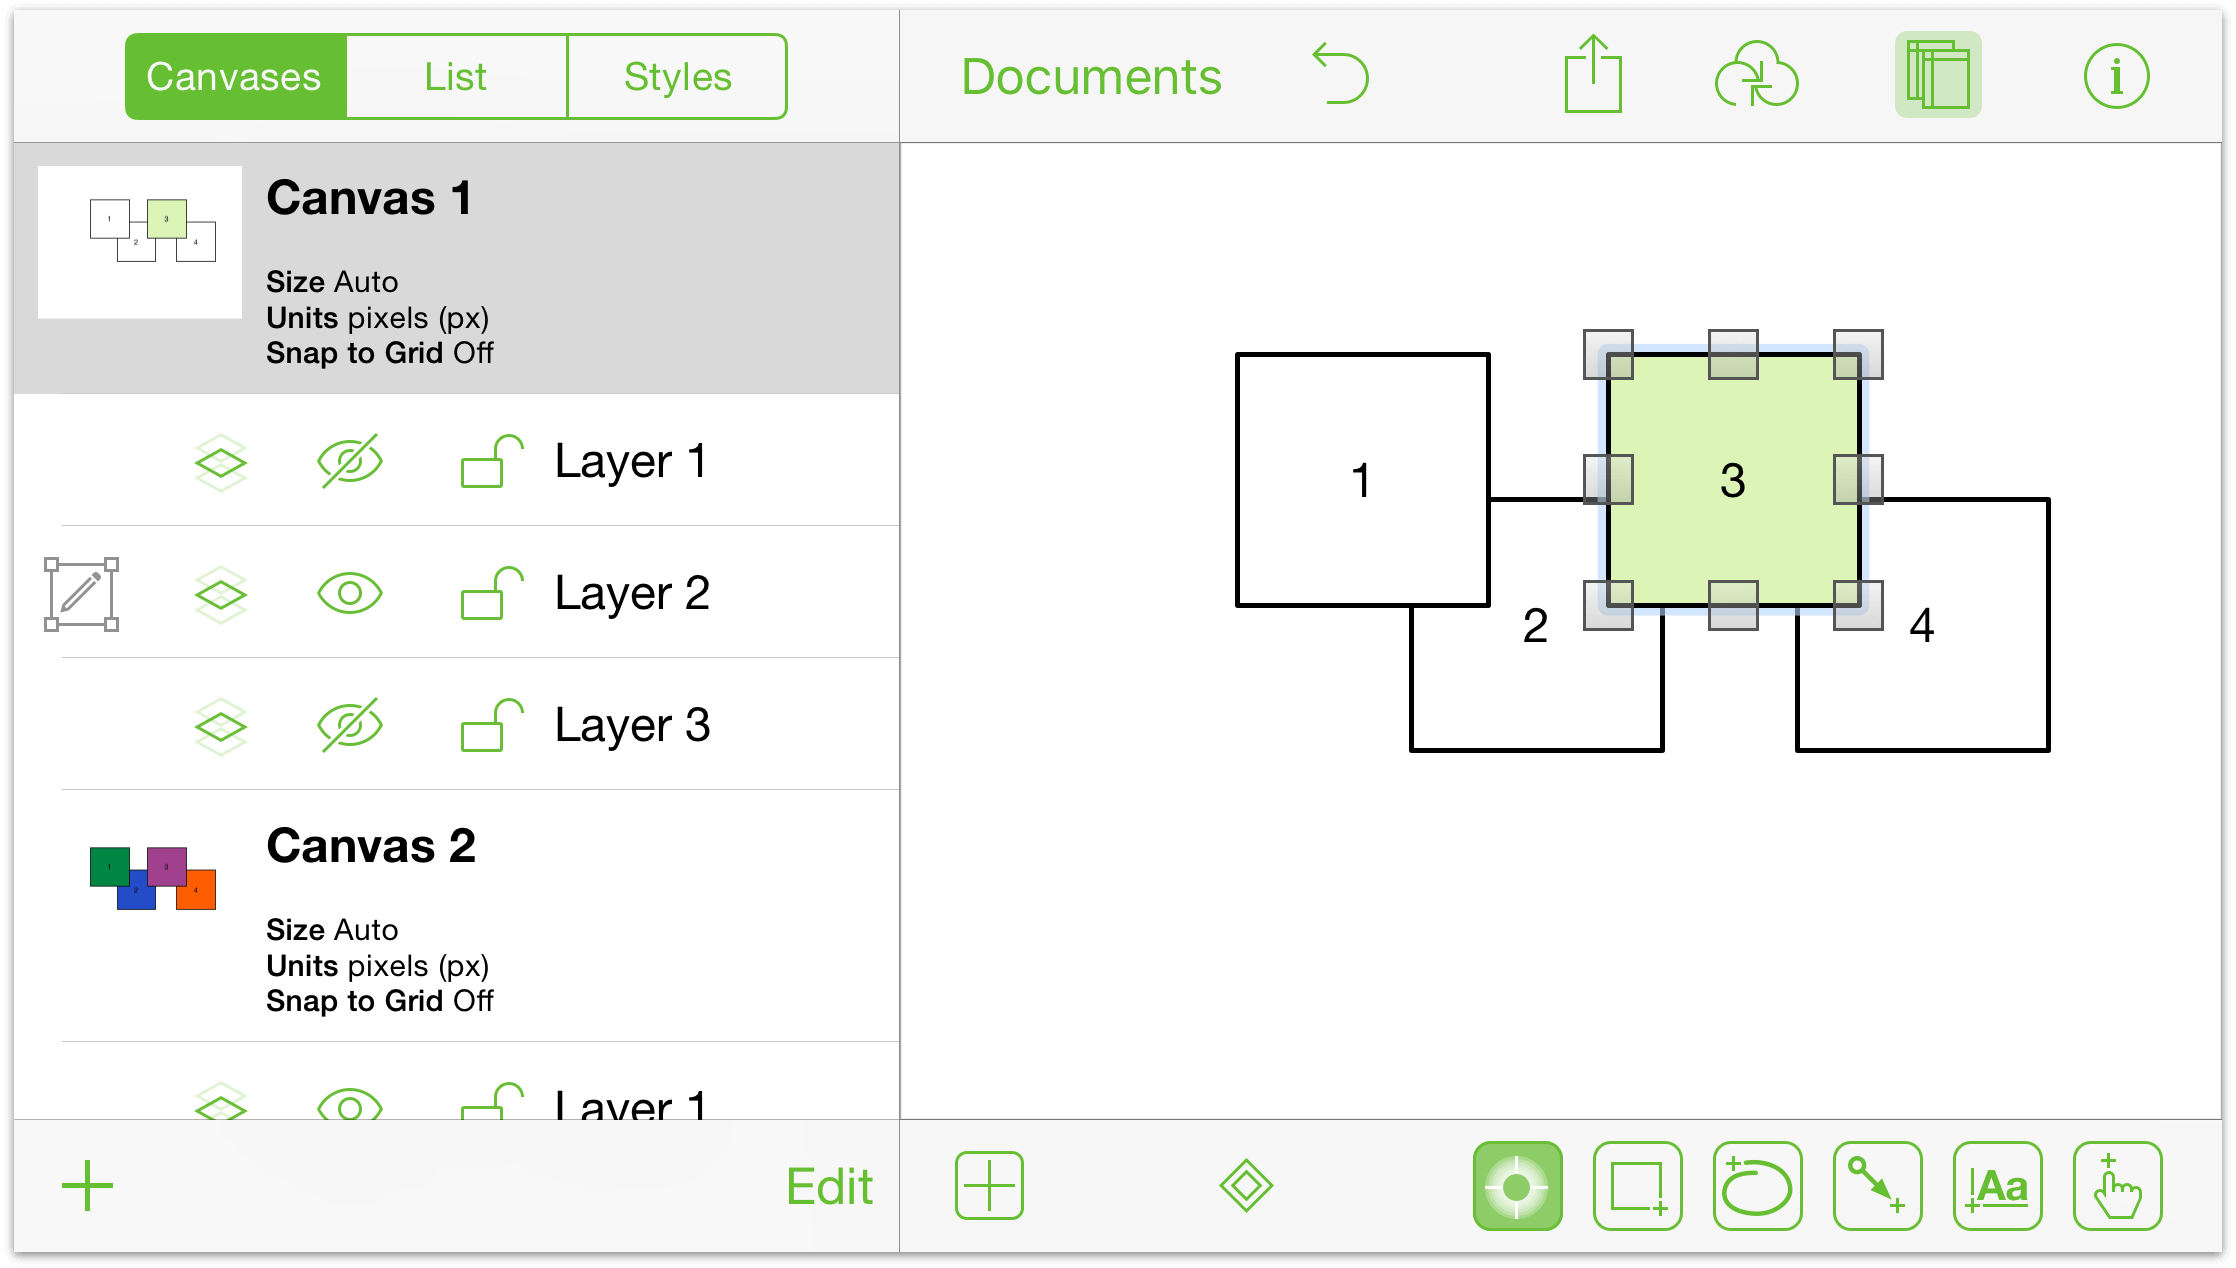 The third square on Layer 2 now has a light green color as its fill